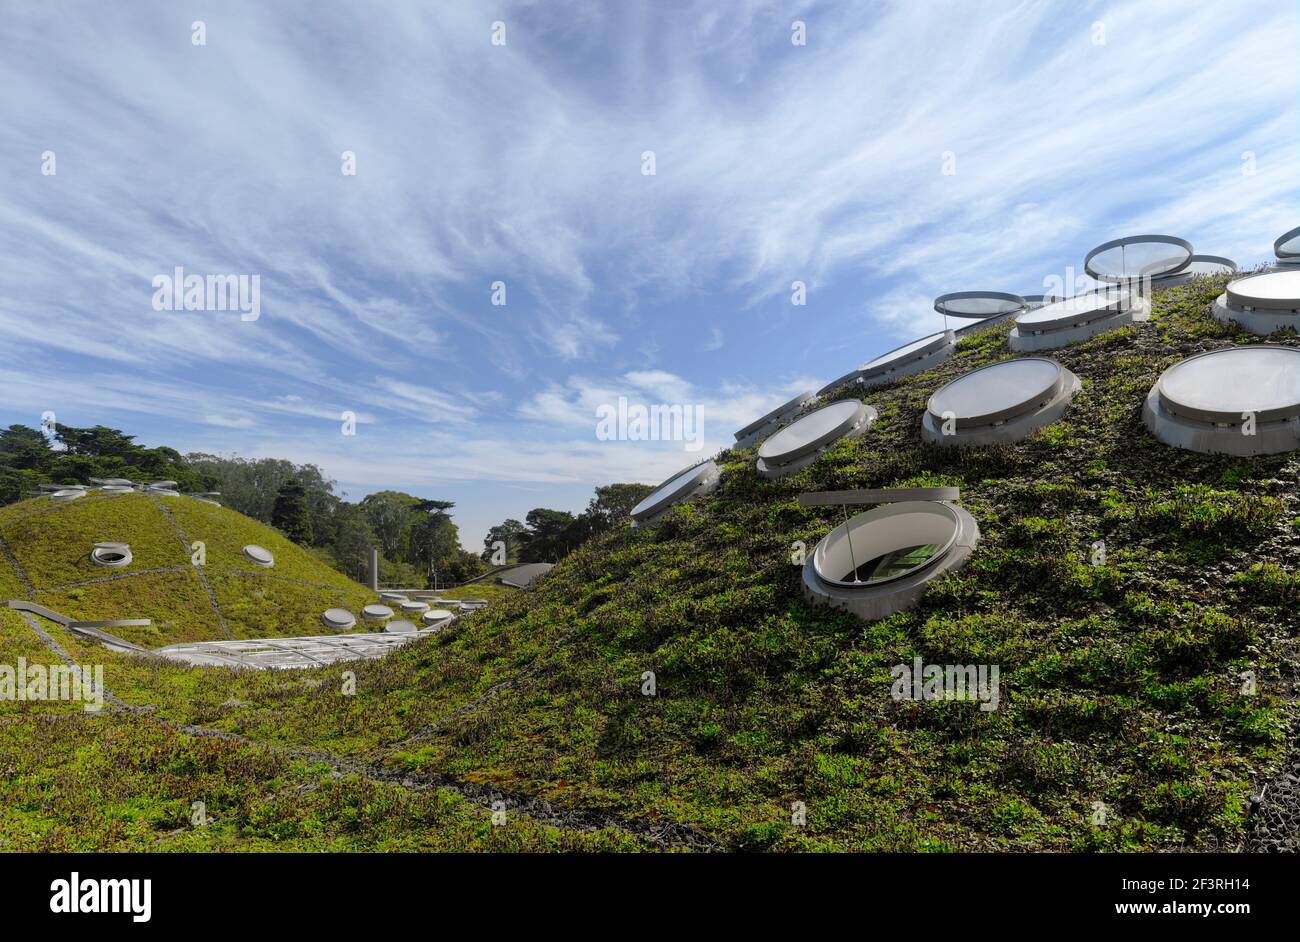 California Academy of Sciences. Exterior grass domes with circular skylights for natural lighting Stock Photo